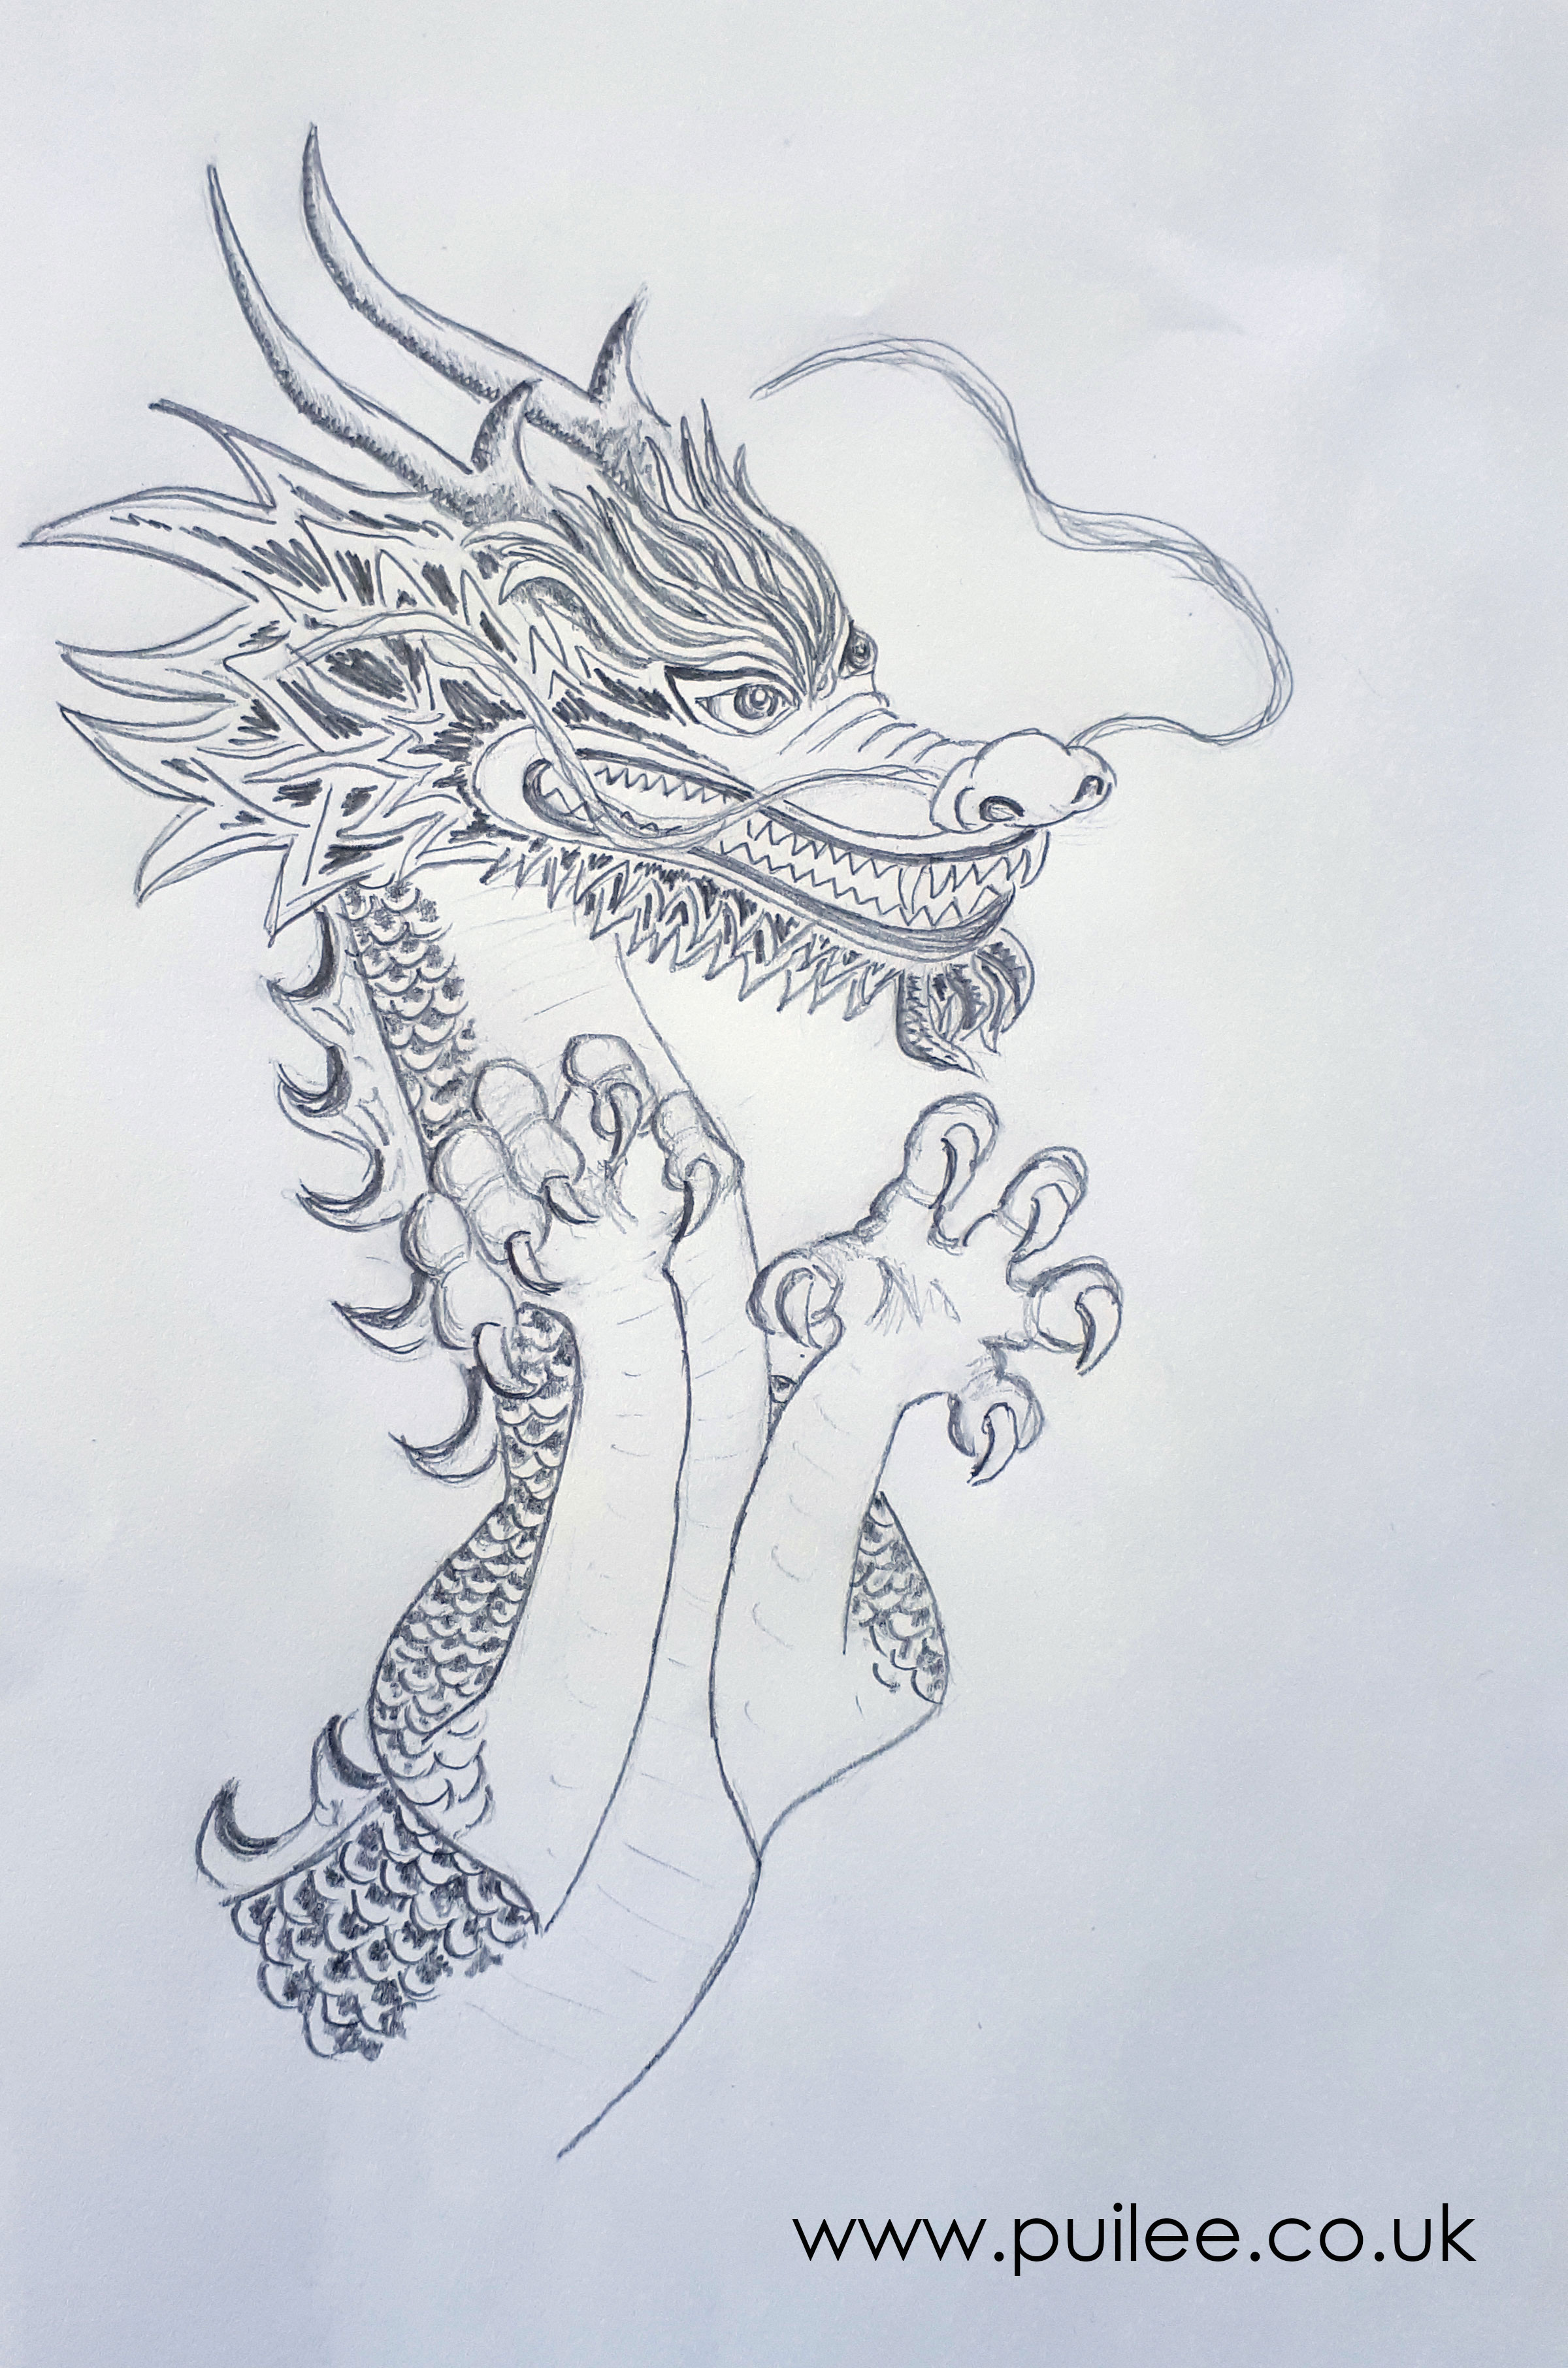 Chinese Dragon (2020) pencil on paper - Artist Pui Lee